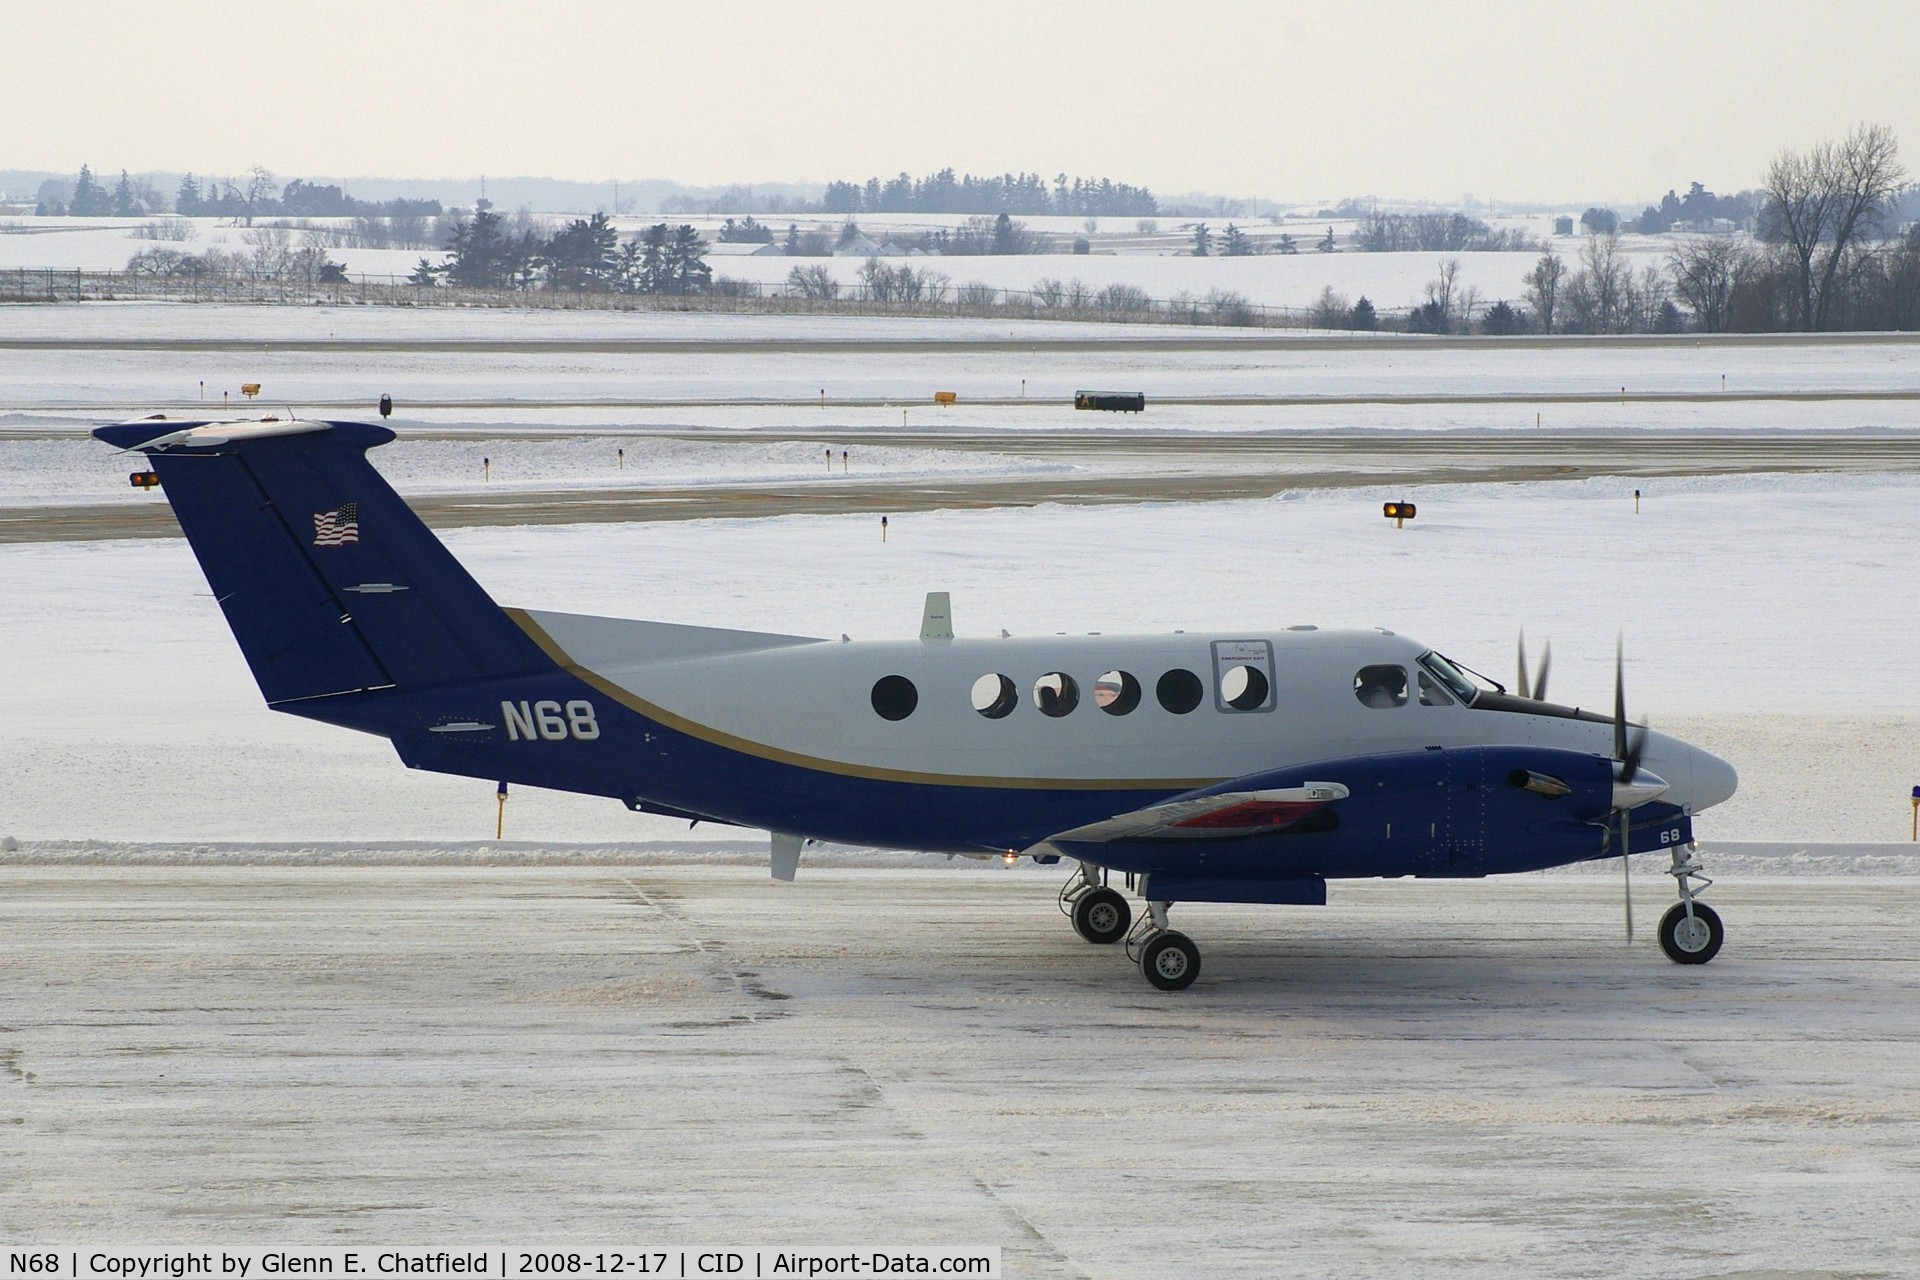 N68, 1988 Beech 300 C/N FF-3, Taxiing to Rockwell-Collins